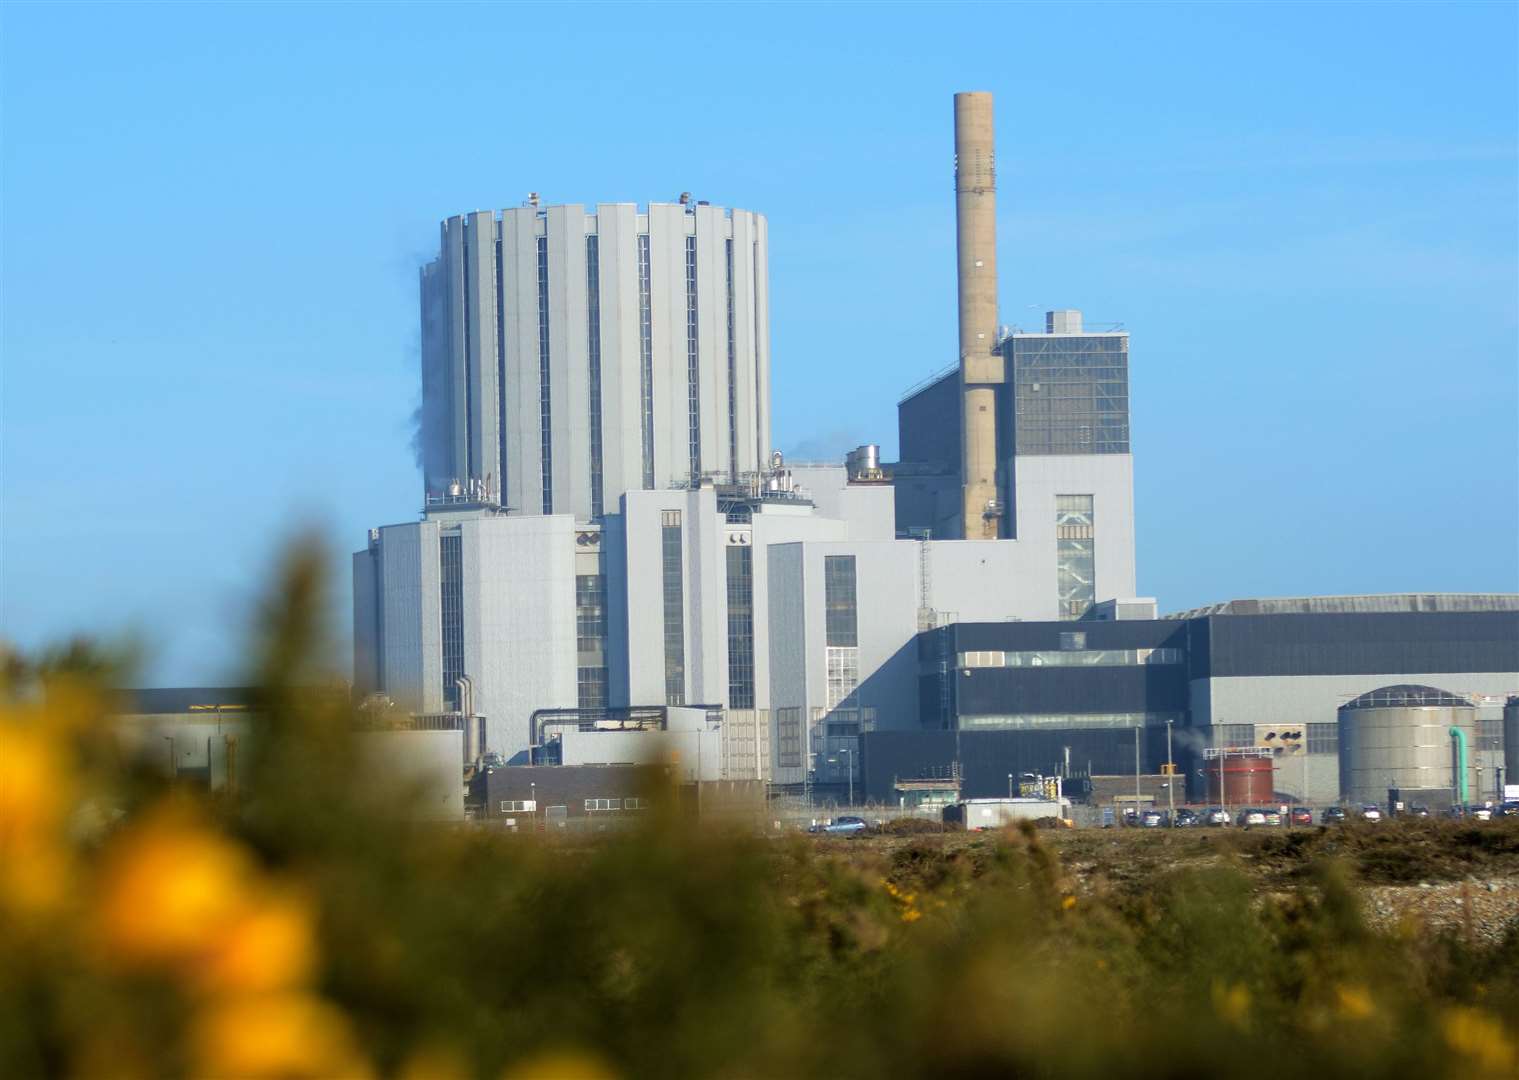 Dungeness B nuclear power station has now entered the defuelling process